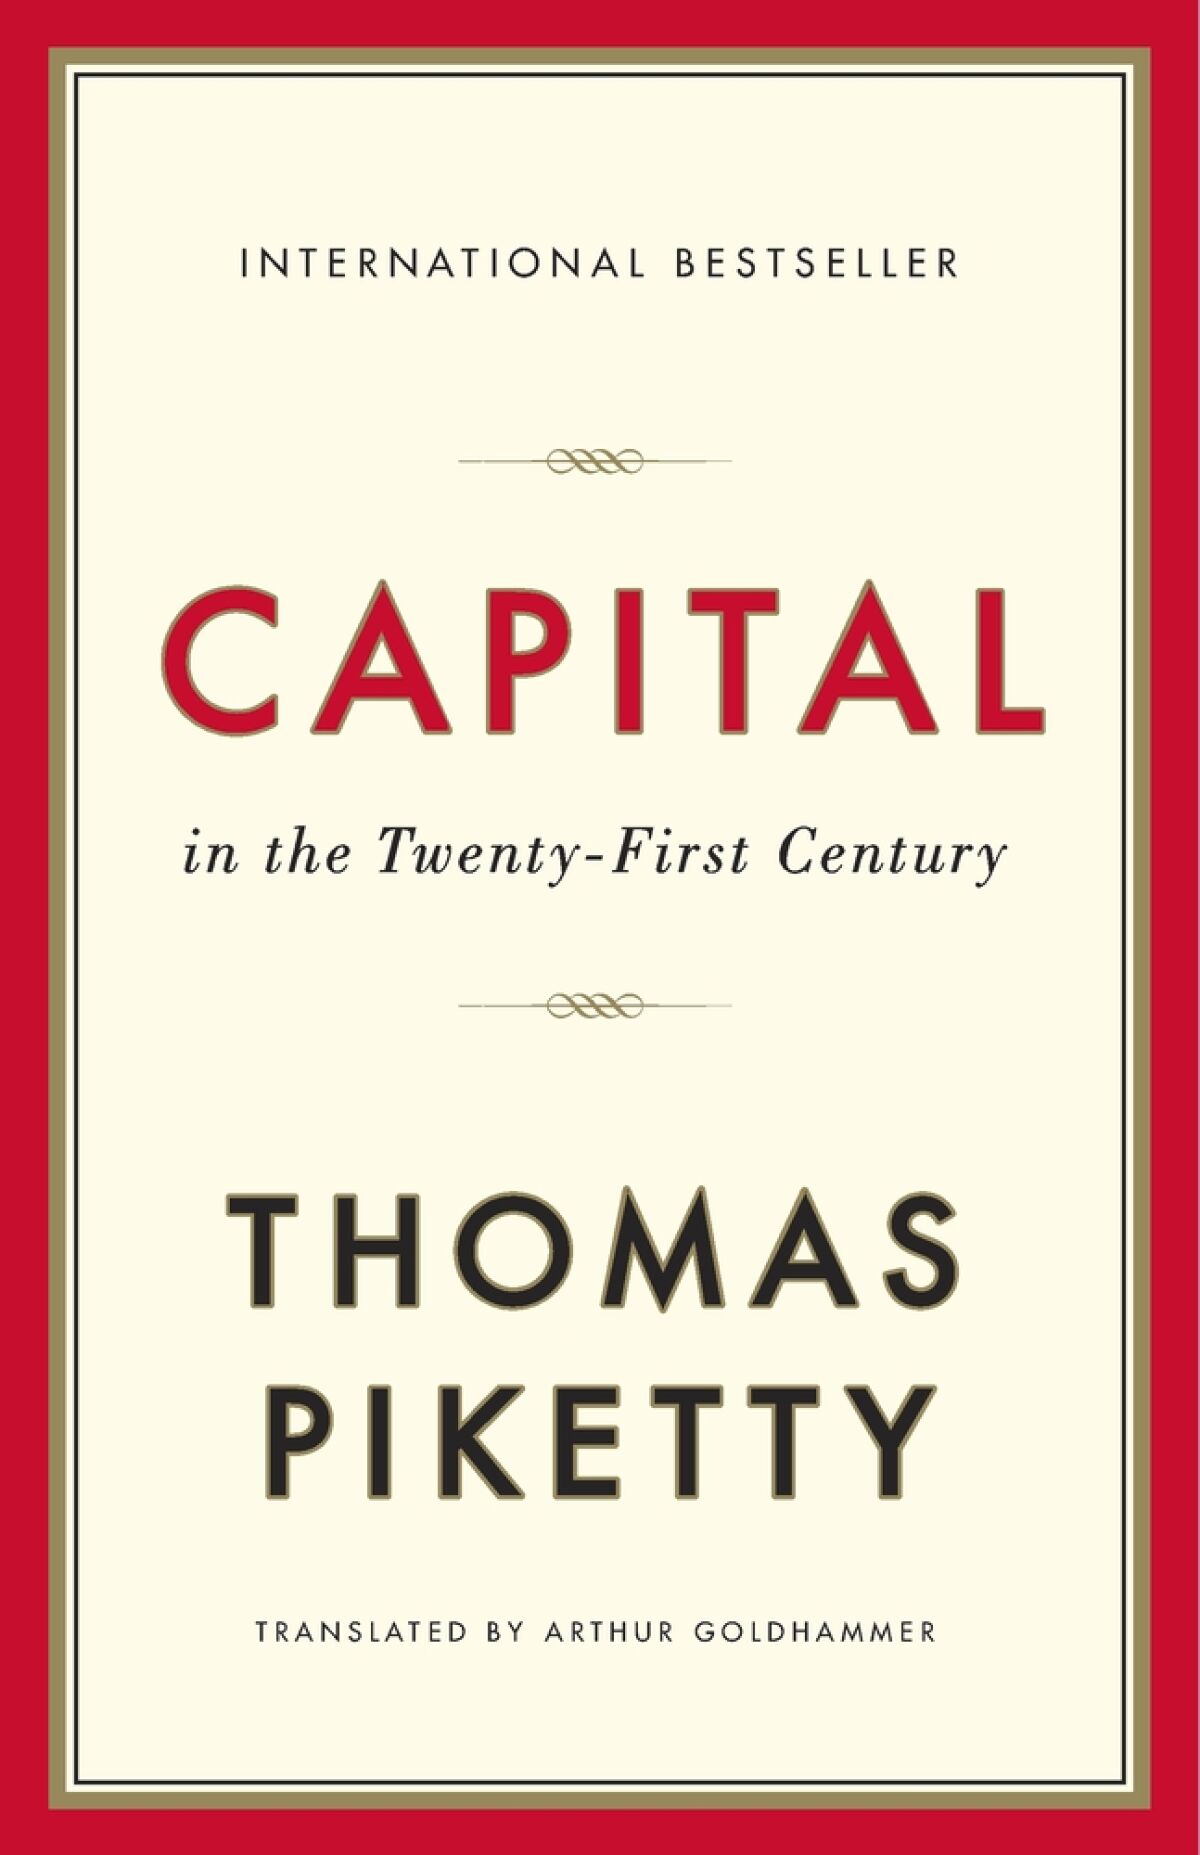 The book "Capital in the Twenty-First Century," by Thomas Piketty